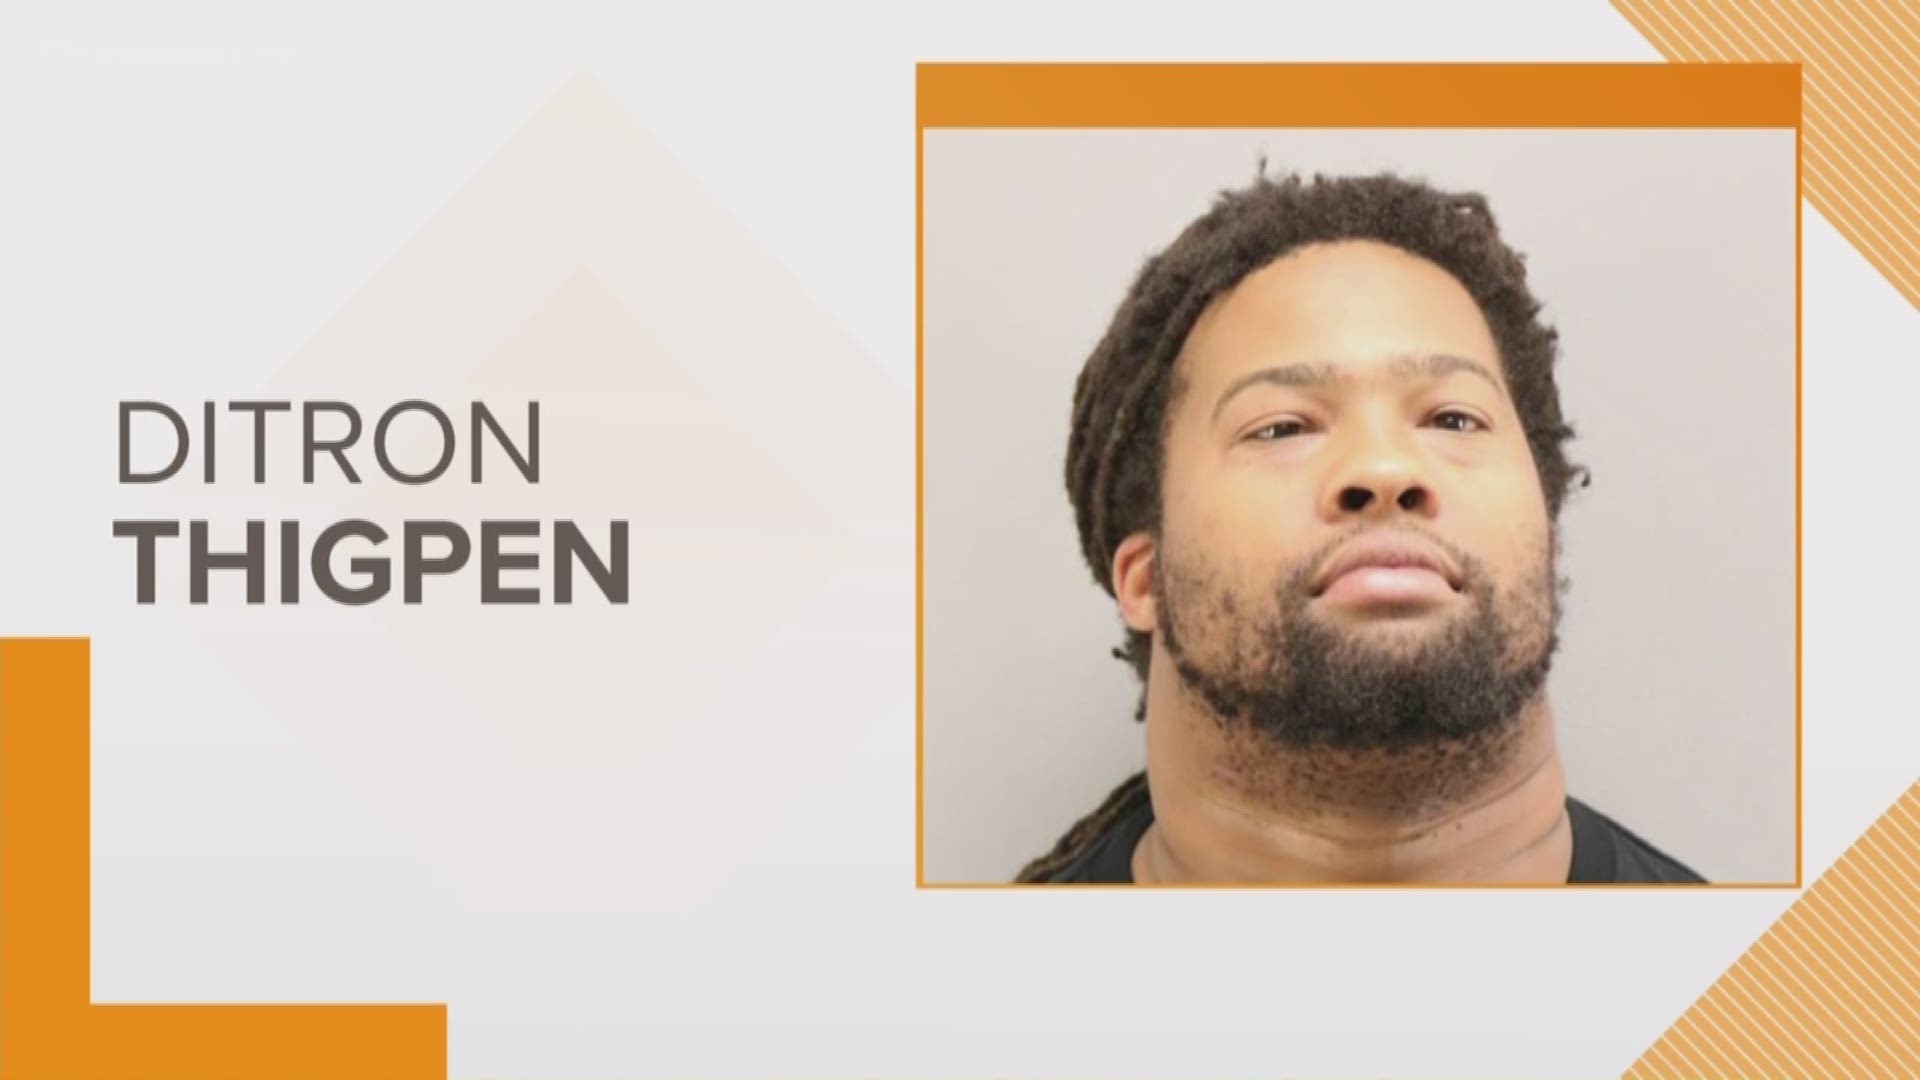 Ditron Thigpen faces a murder charge after a deadly shooting on Atlantis Drive in Virginia Beach.